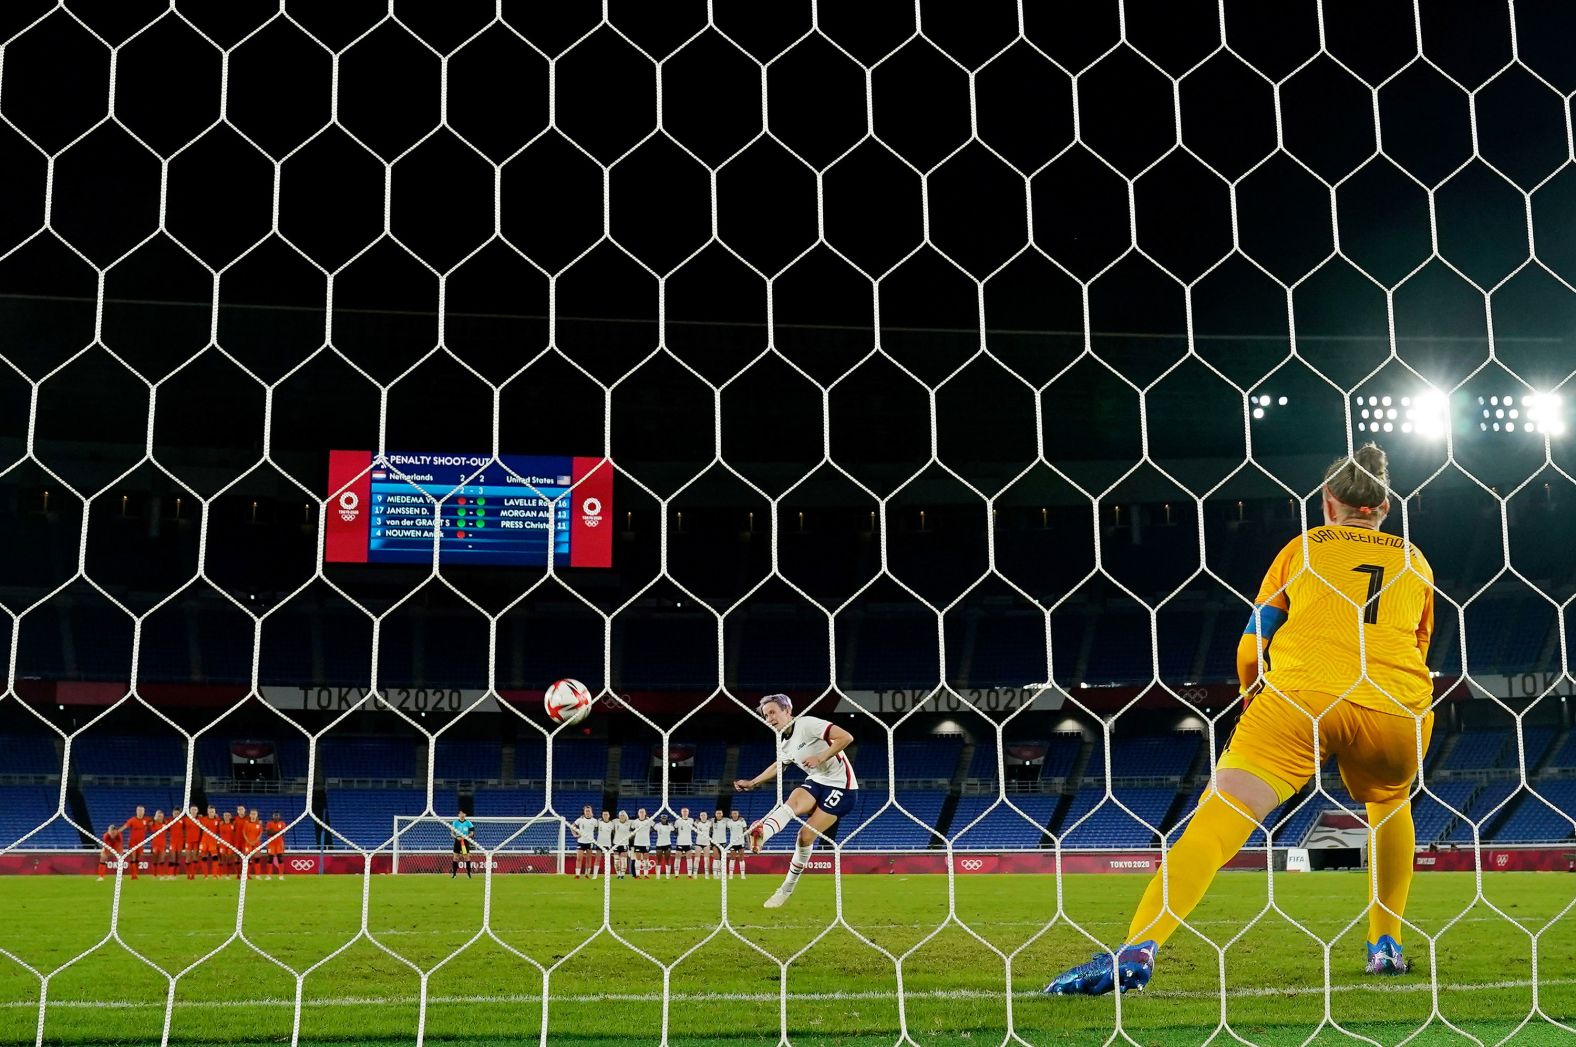 Rapinoe scores the game-winning penalty kick against the Netherlands during the quarterfinals of the Tokyo Olympics in July 2021. The goal advanced the United States' to the semifinals.